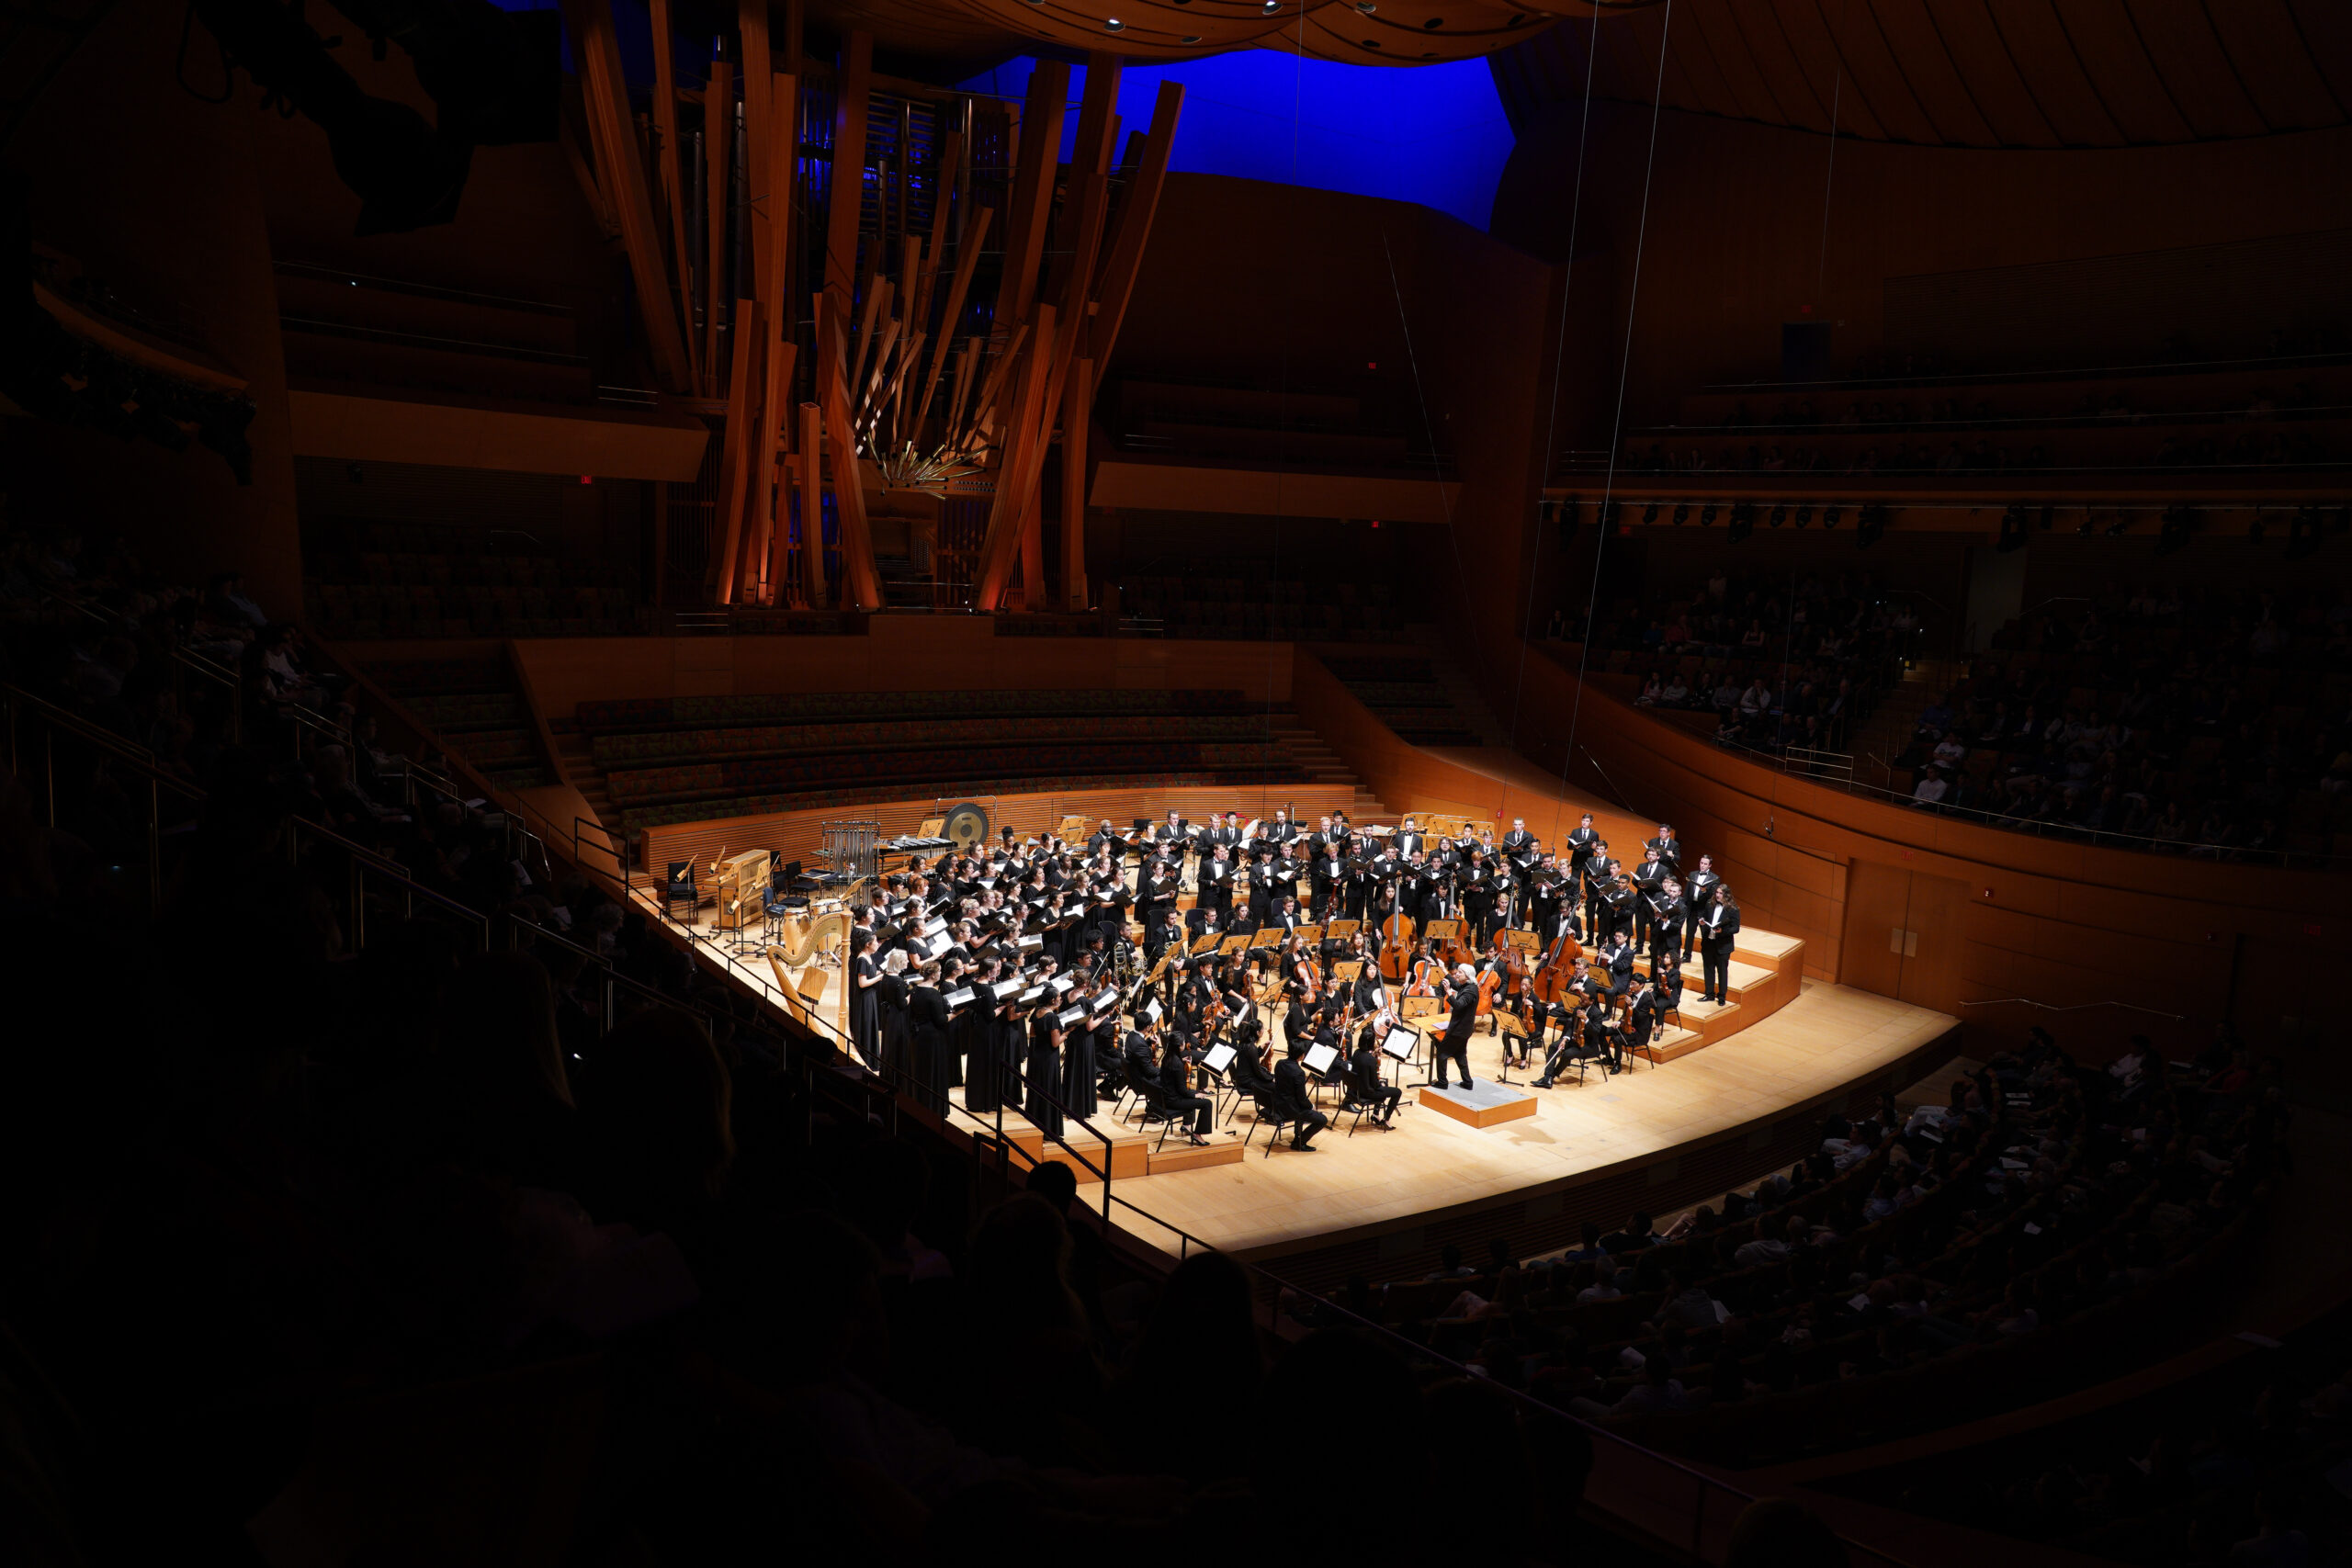 2019: Carl St.Clair, artistic leader and principal conductor of the USC Thornton orchestras, leads the USC Thornton Symphony in a performance at Walt Disney Concert Hall featuring Beethoven’s 5th Symphony as well as two works by Thornton composers, Frank Ticheli’s celebrated 